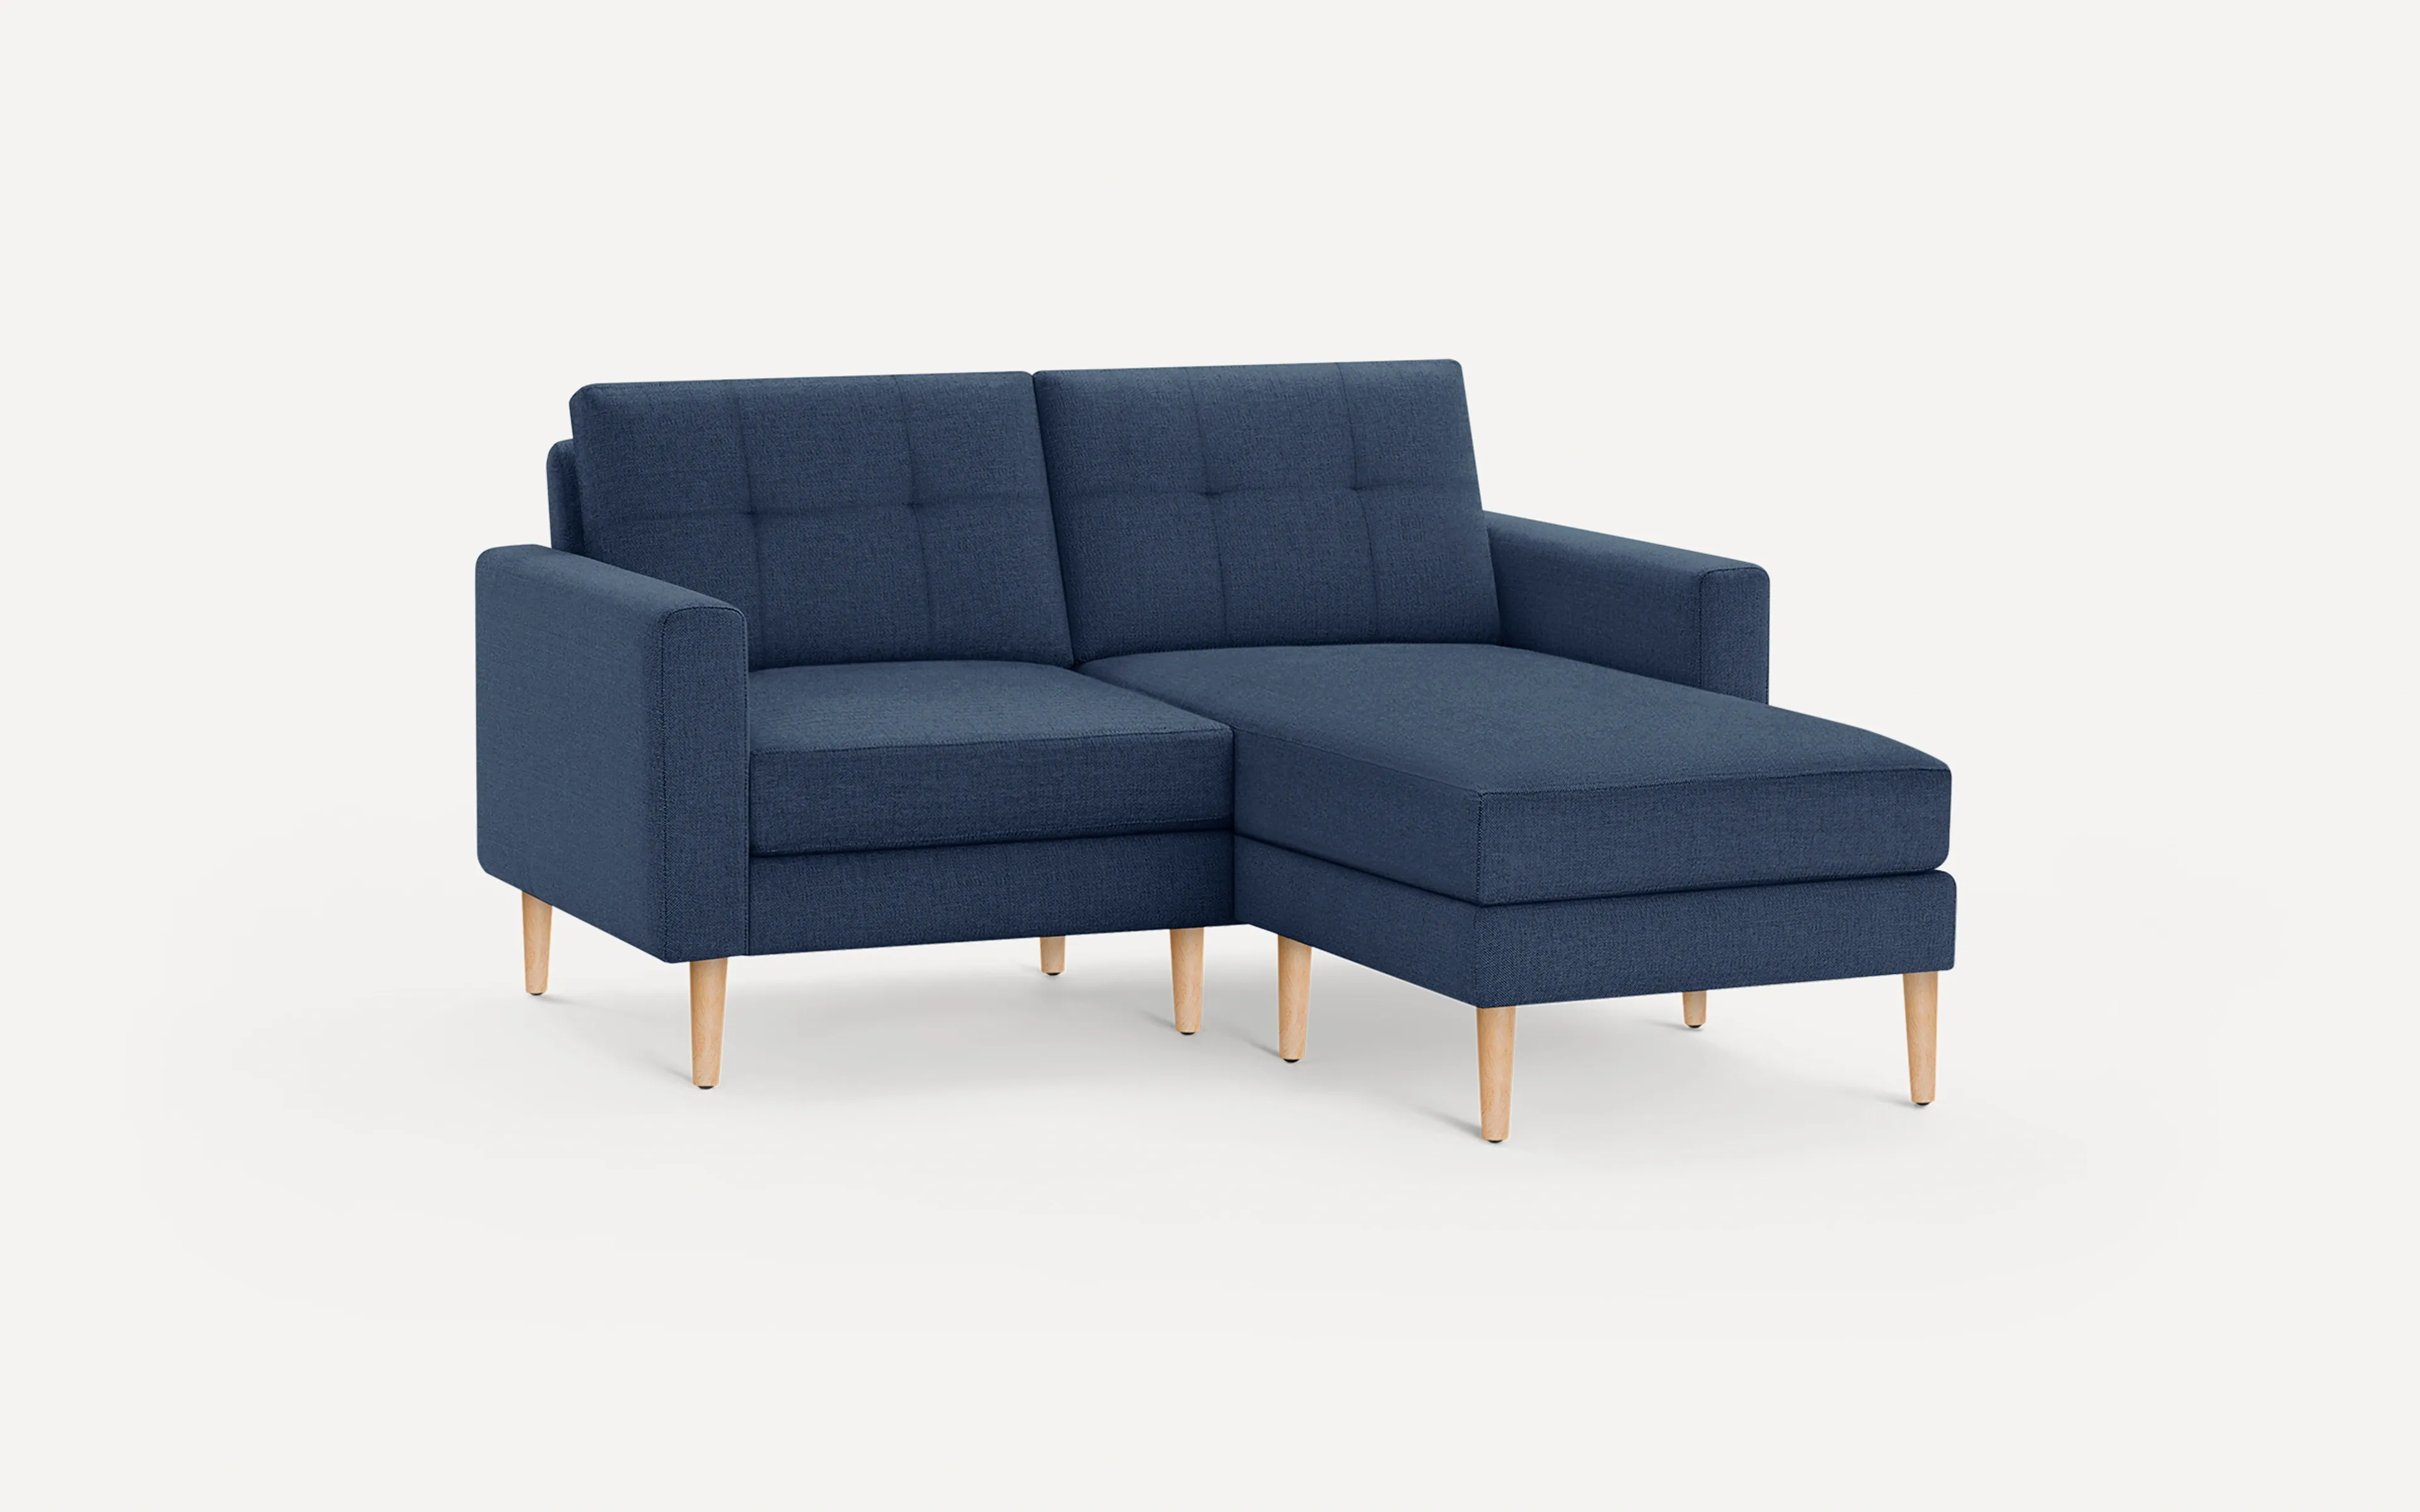 Original Nomad Chaise Loveseat in Navy Blue Fabric